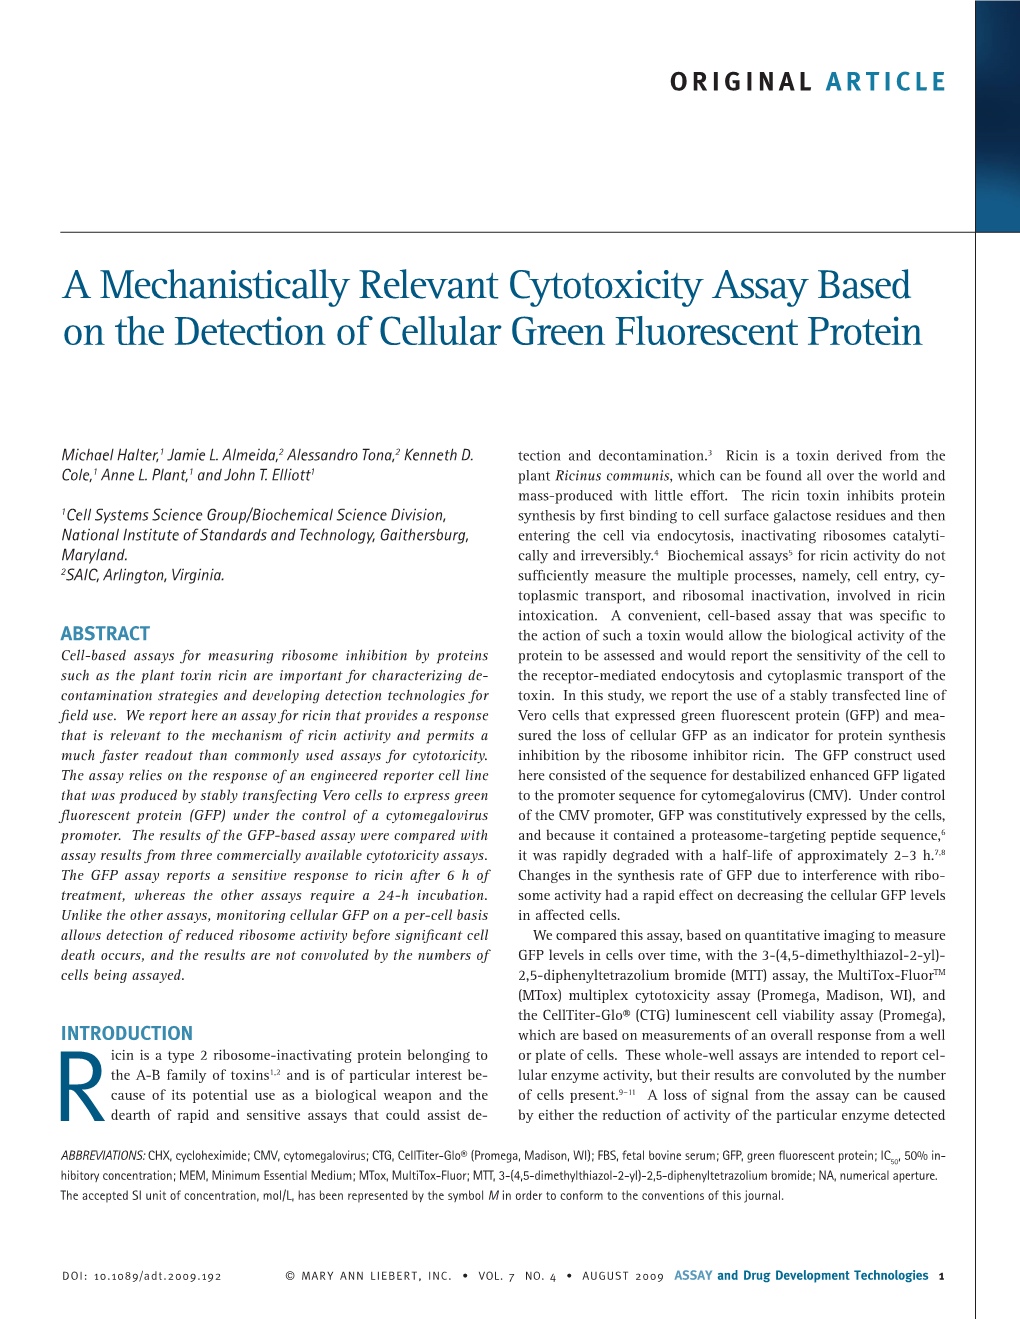 A Mechanistically Relevant Cytotoxicity Assay Based on the Detection of Cellular Green Fluorescent Protein